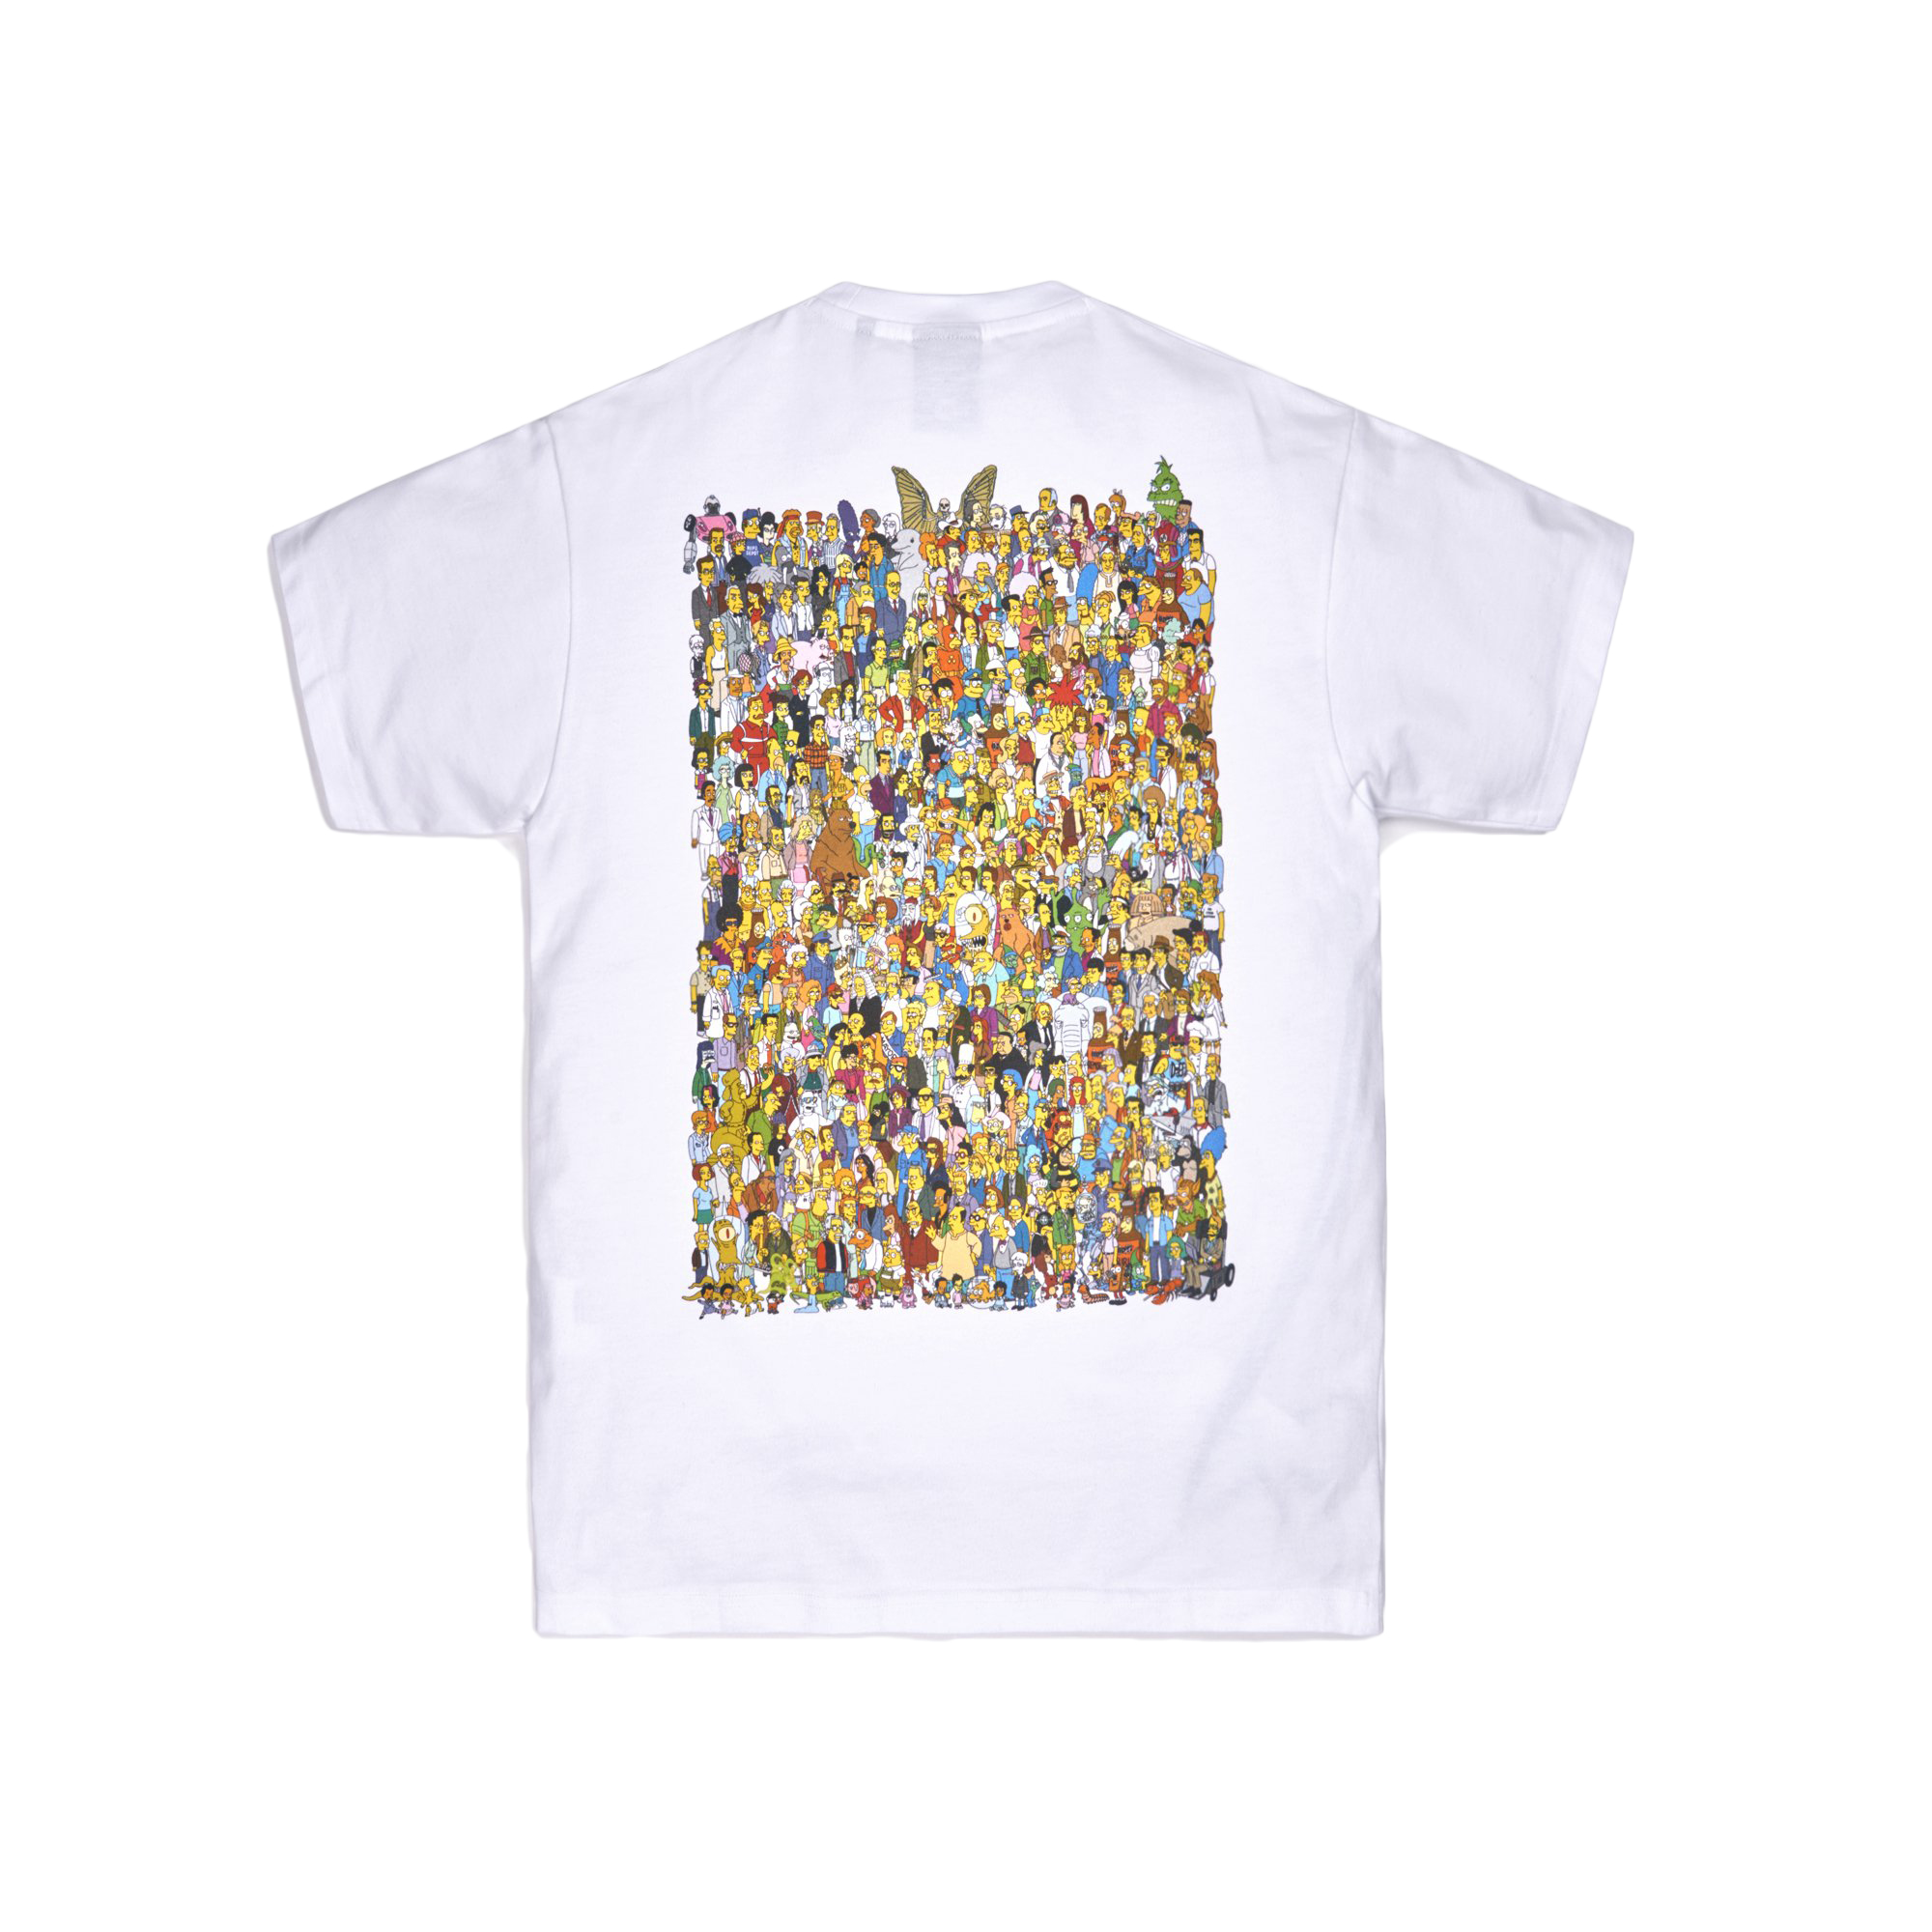 Kith x The Simpsons Cast Of Characters Tee White